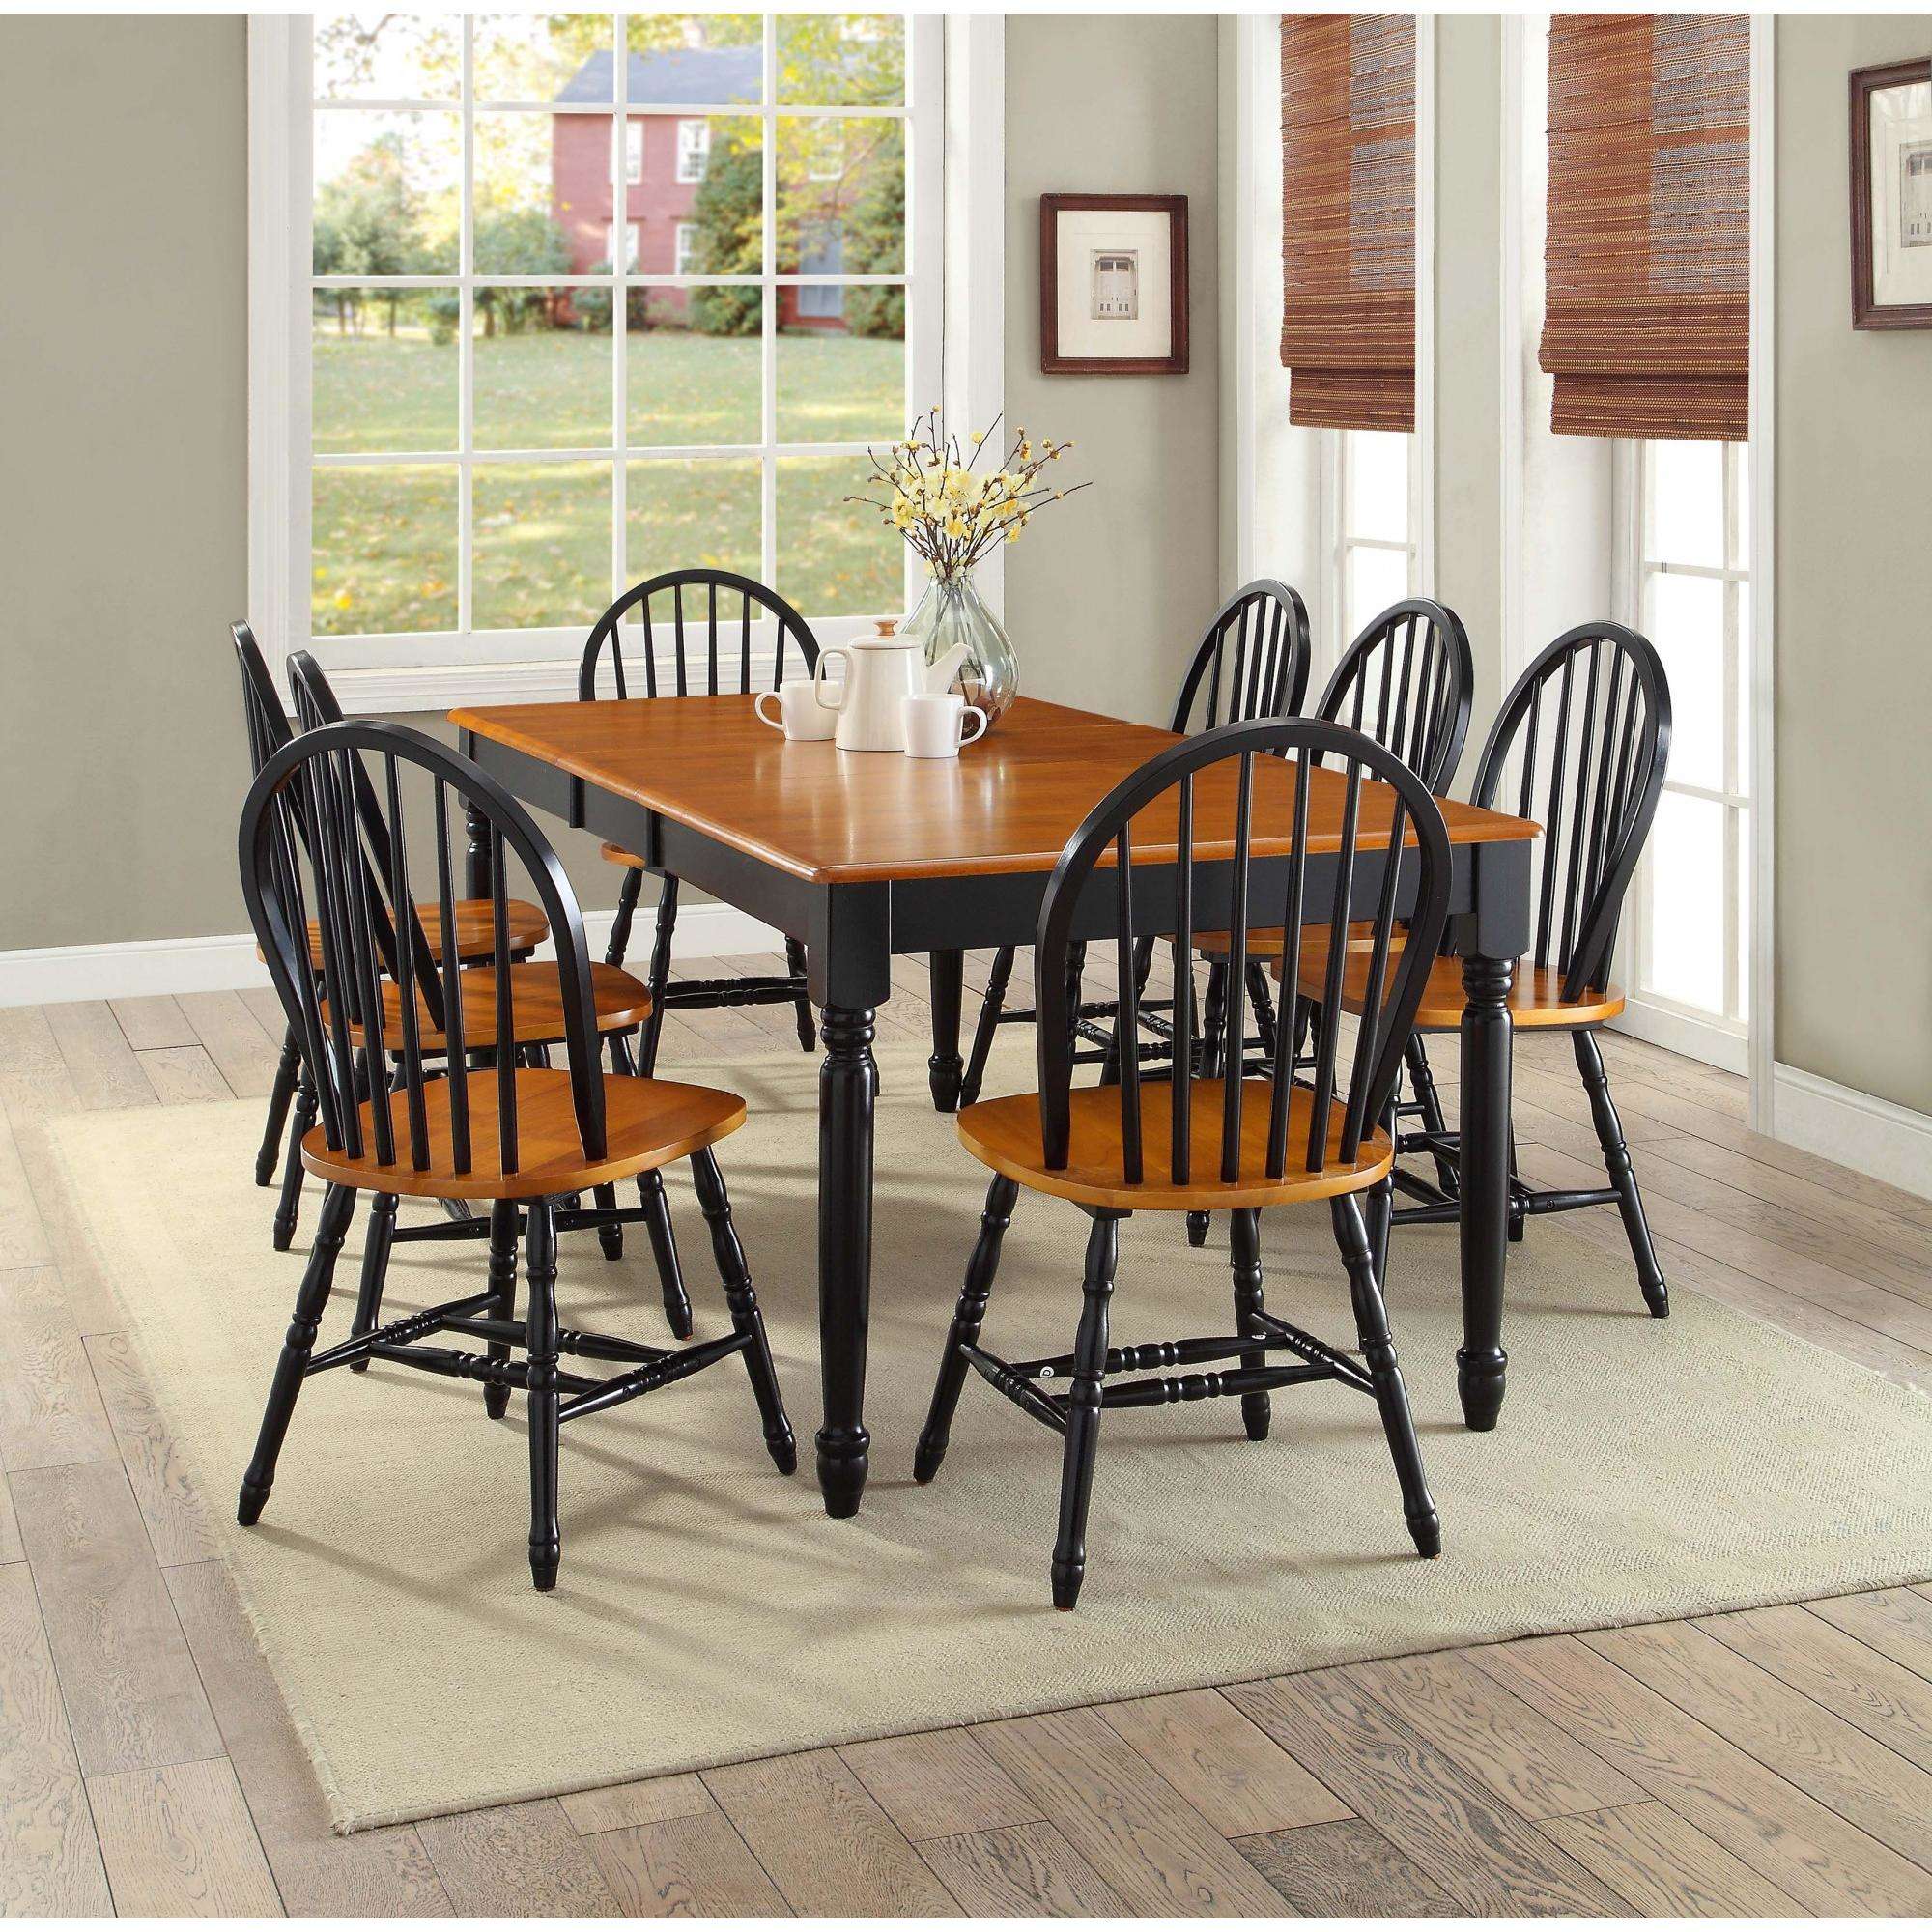 Better Homes and Gardens Autumn Lane Windsor Solid Wood Chairs, Set of 2, Black and Oak - image 7 of 8